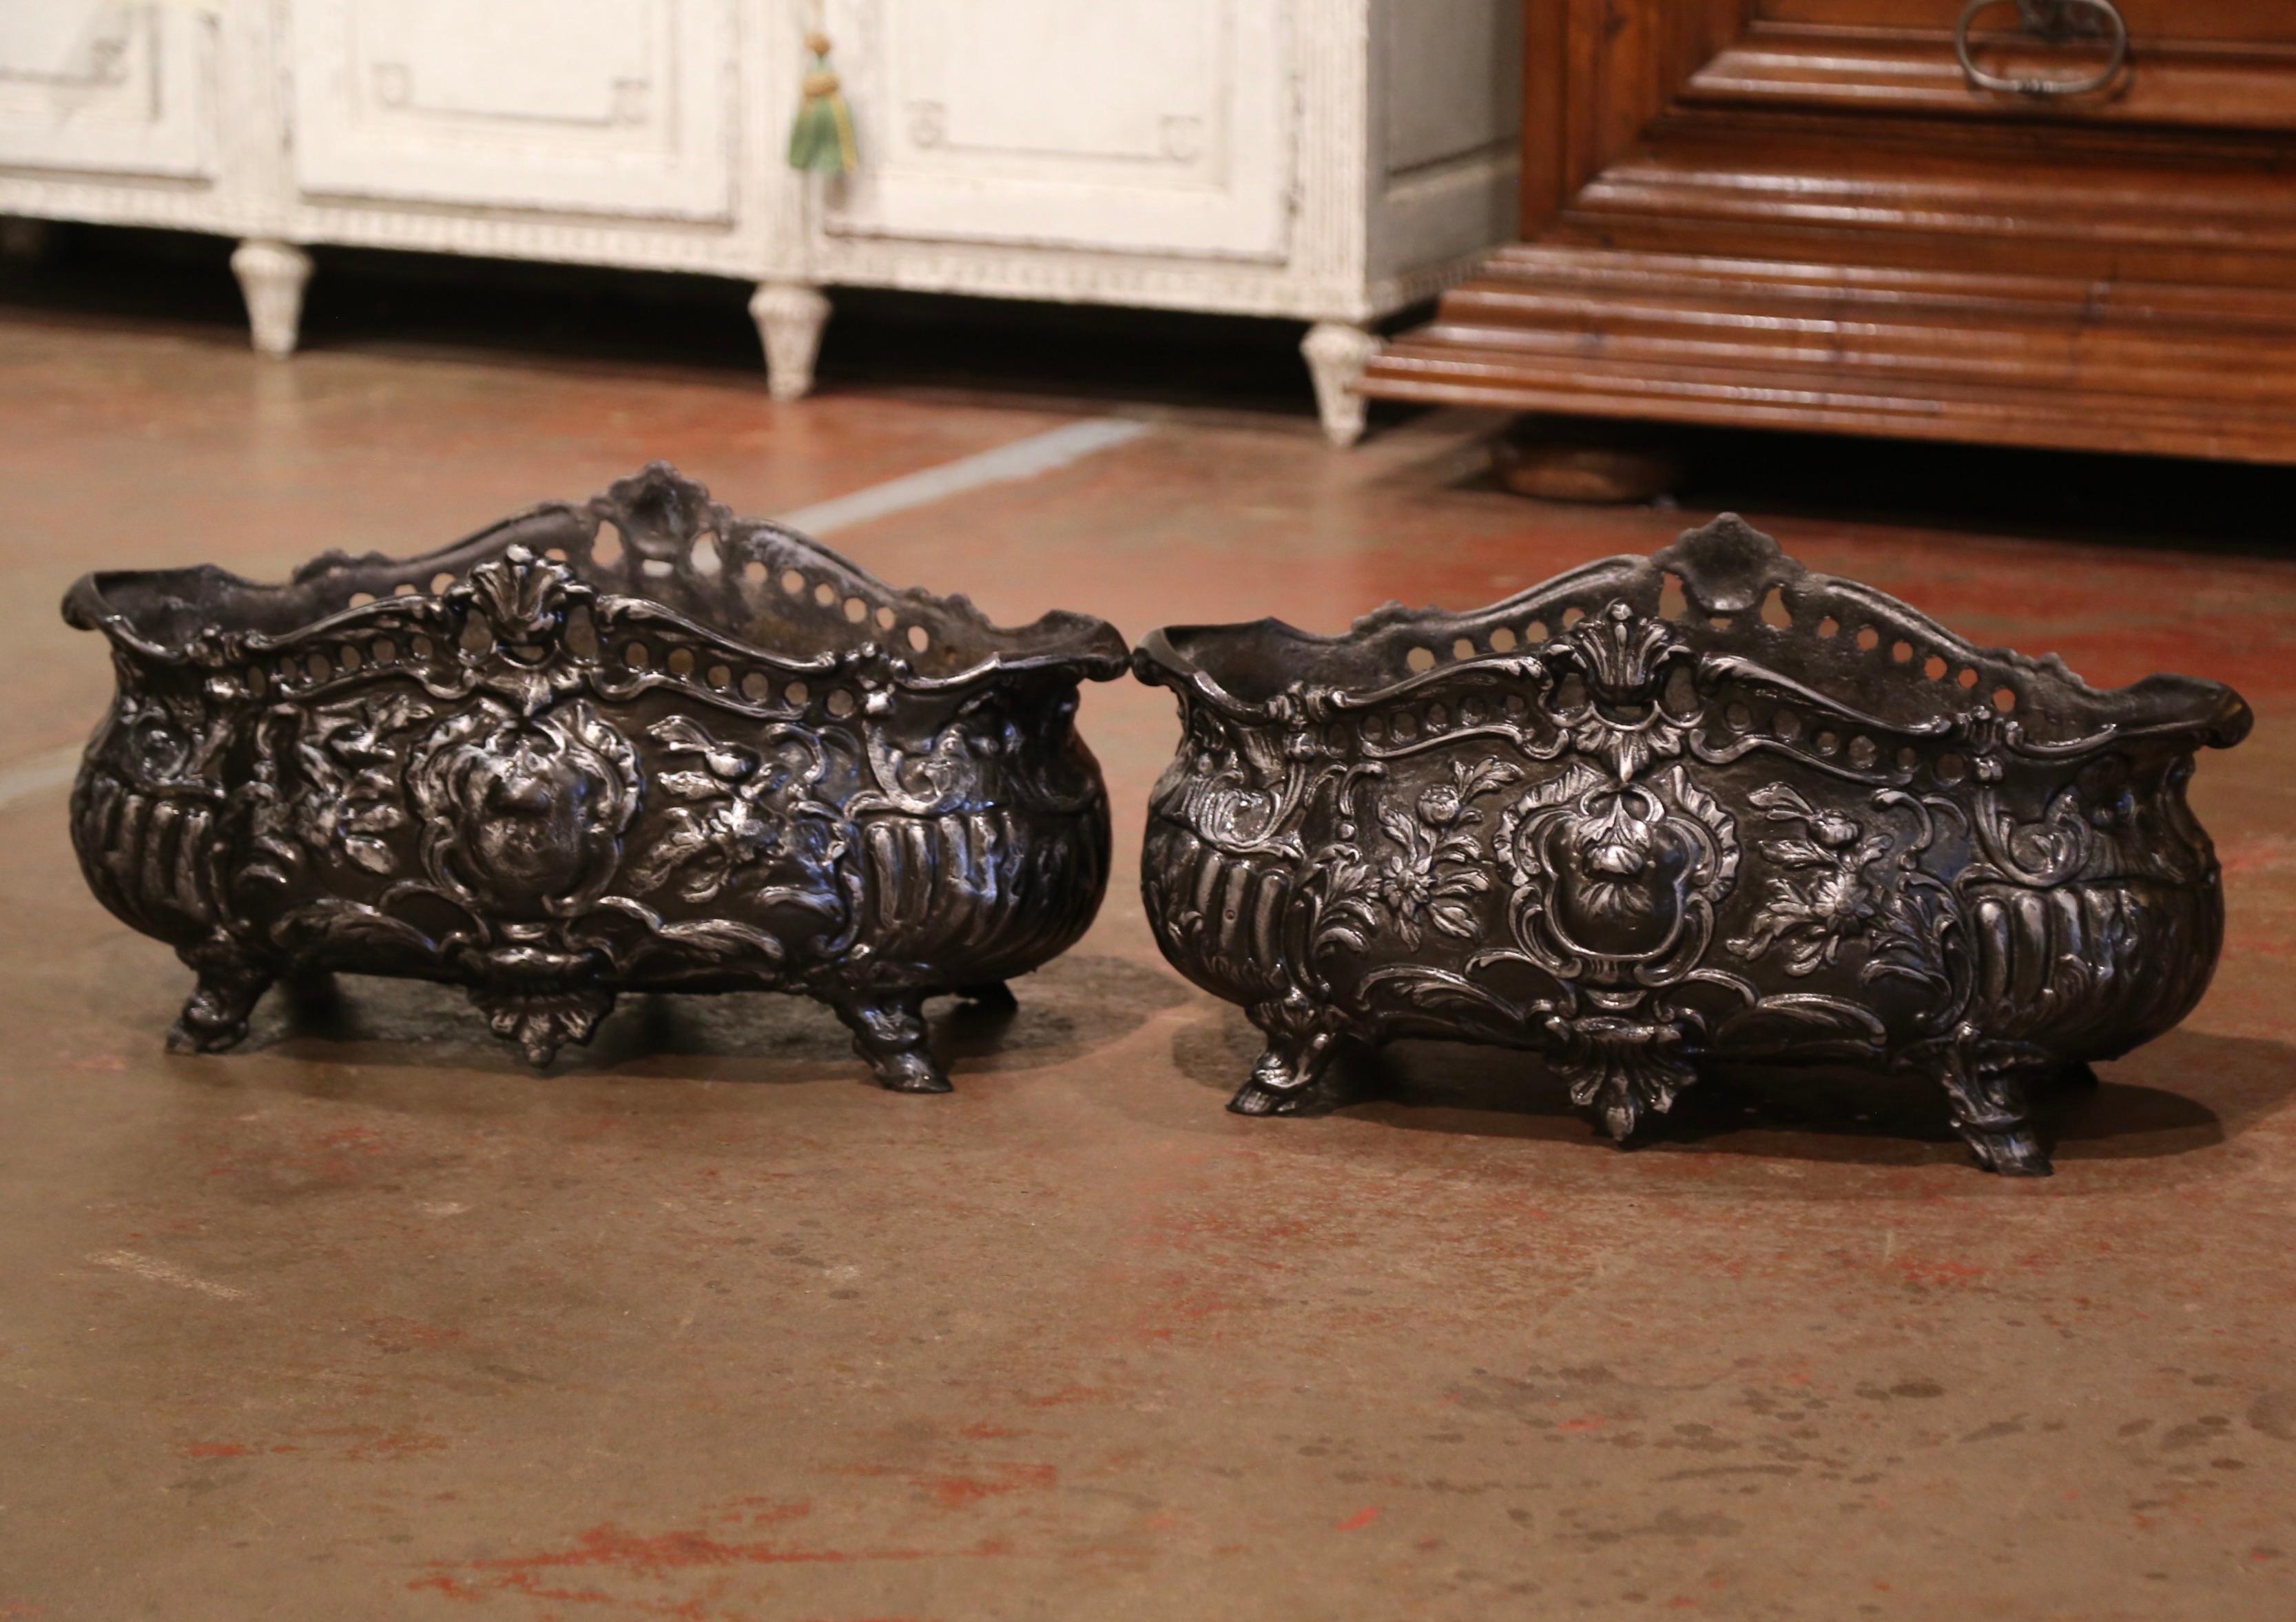 Stage your front door with this elegant pair of antique planters. Crafted in France circa 1880 and oval in shape, each jardinières stands on hoof feet over a bombe form body, and is decorated with floral and leaf motifs in high relief; the planter